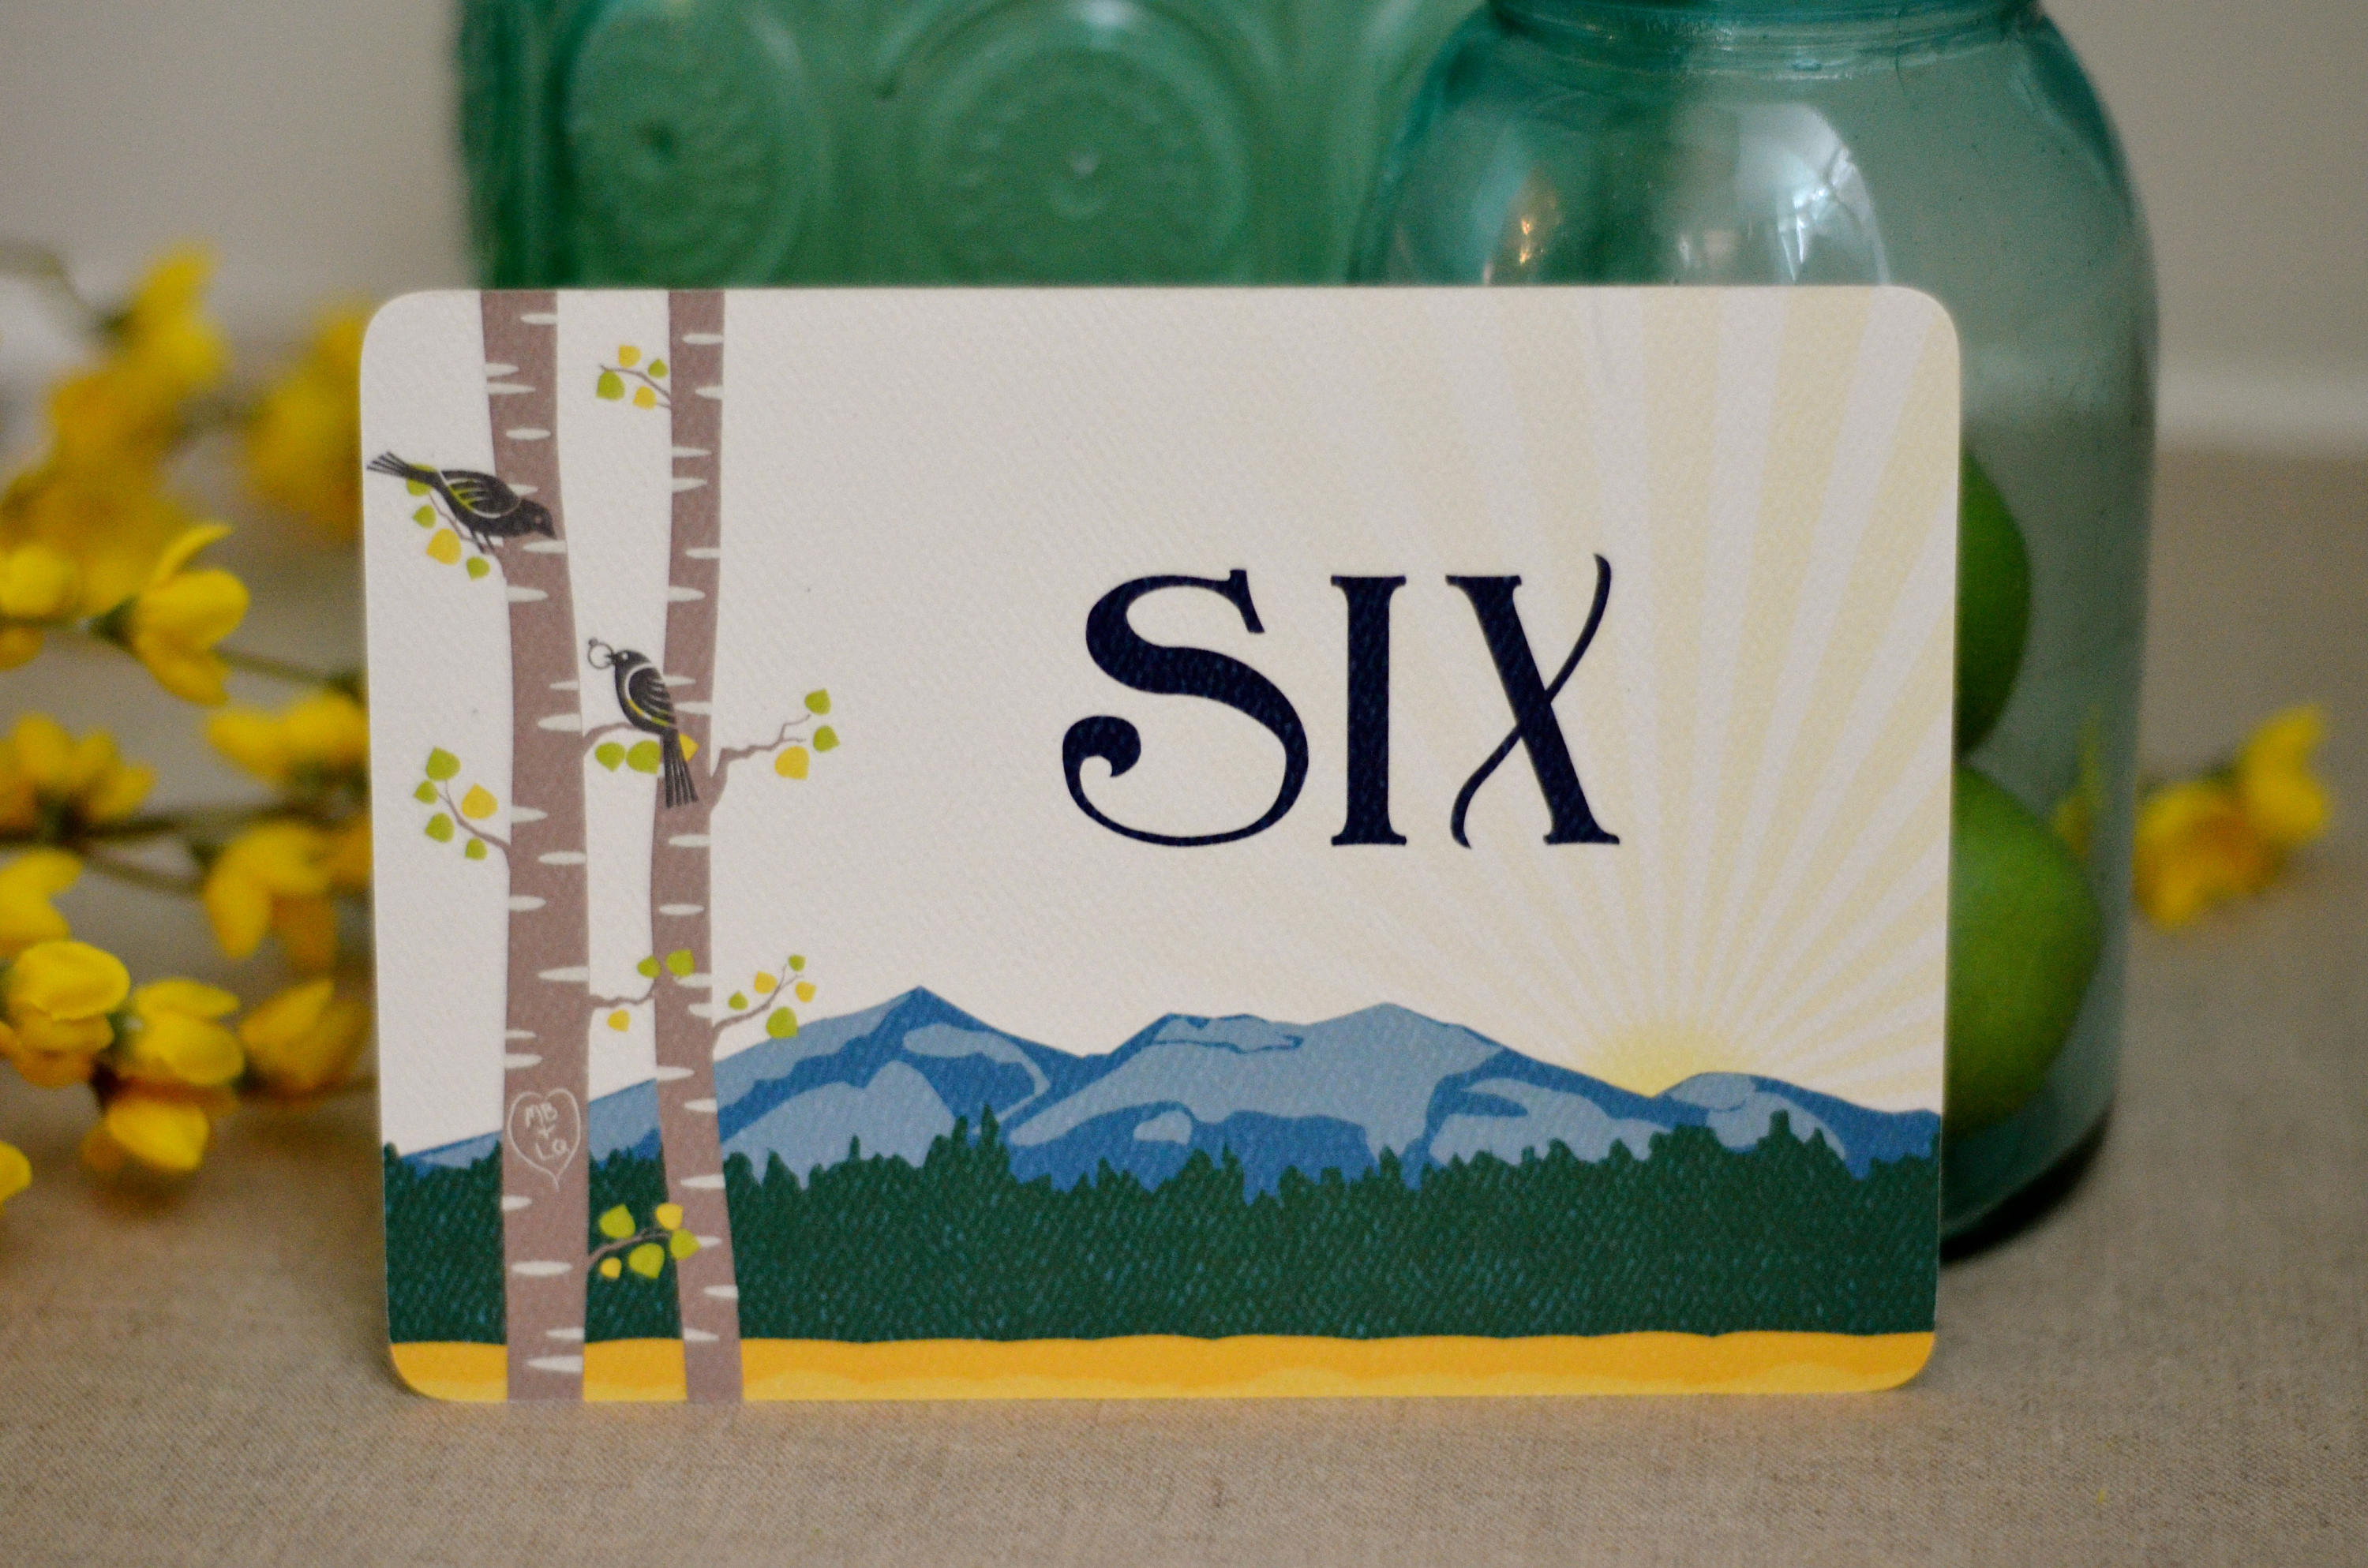 Spring Rocky Mountain Landscape with Birch Trees Table Numbers / Place Cards for Wedding Reception 5x7